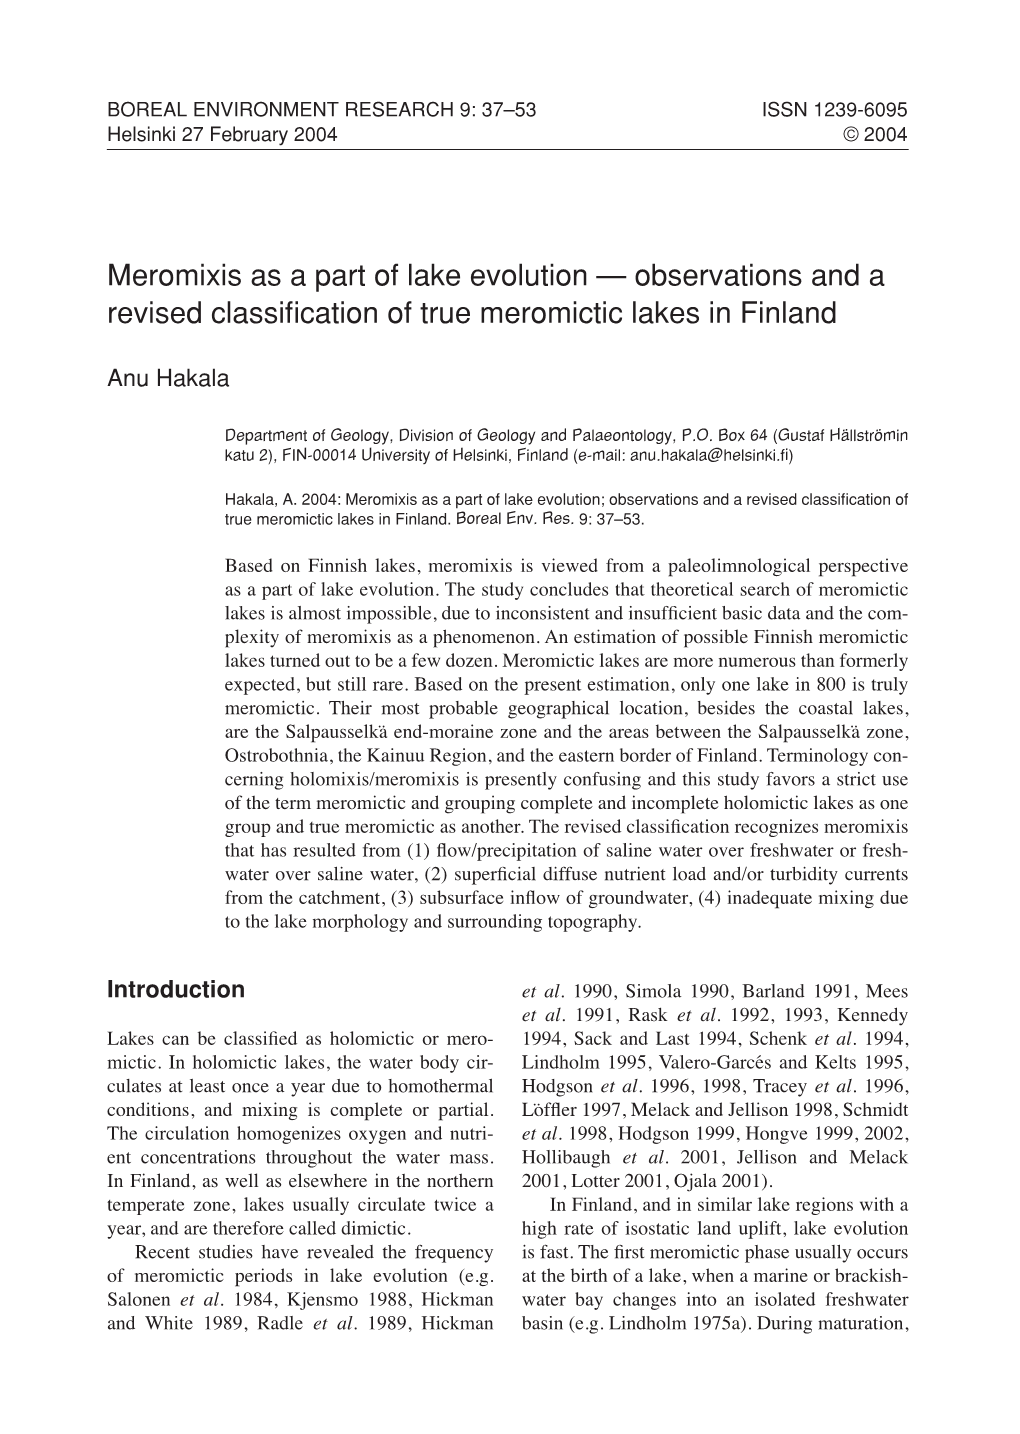 Meromixis As a Part of Lake Evolution — Observations and a Revised Classiﬁcation of True Meromictic Lakes in Finland